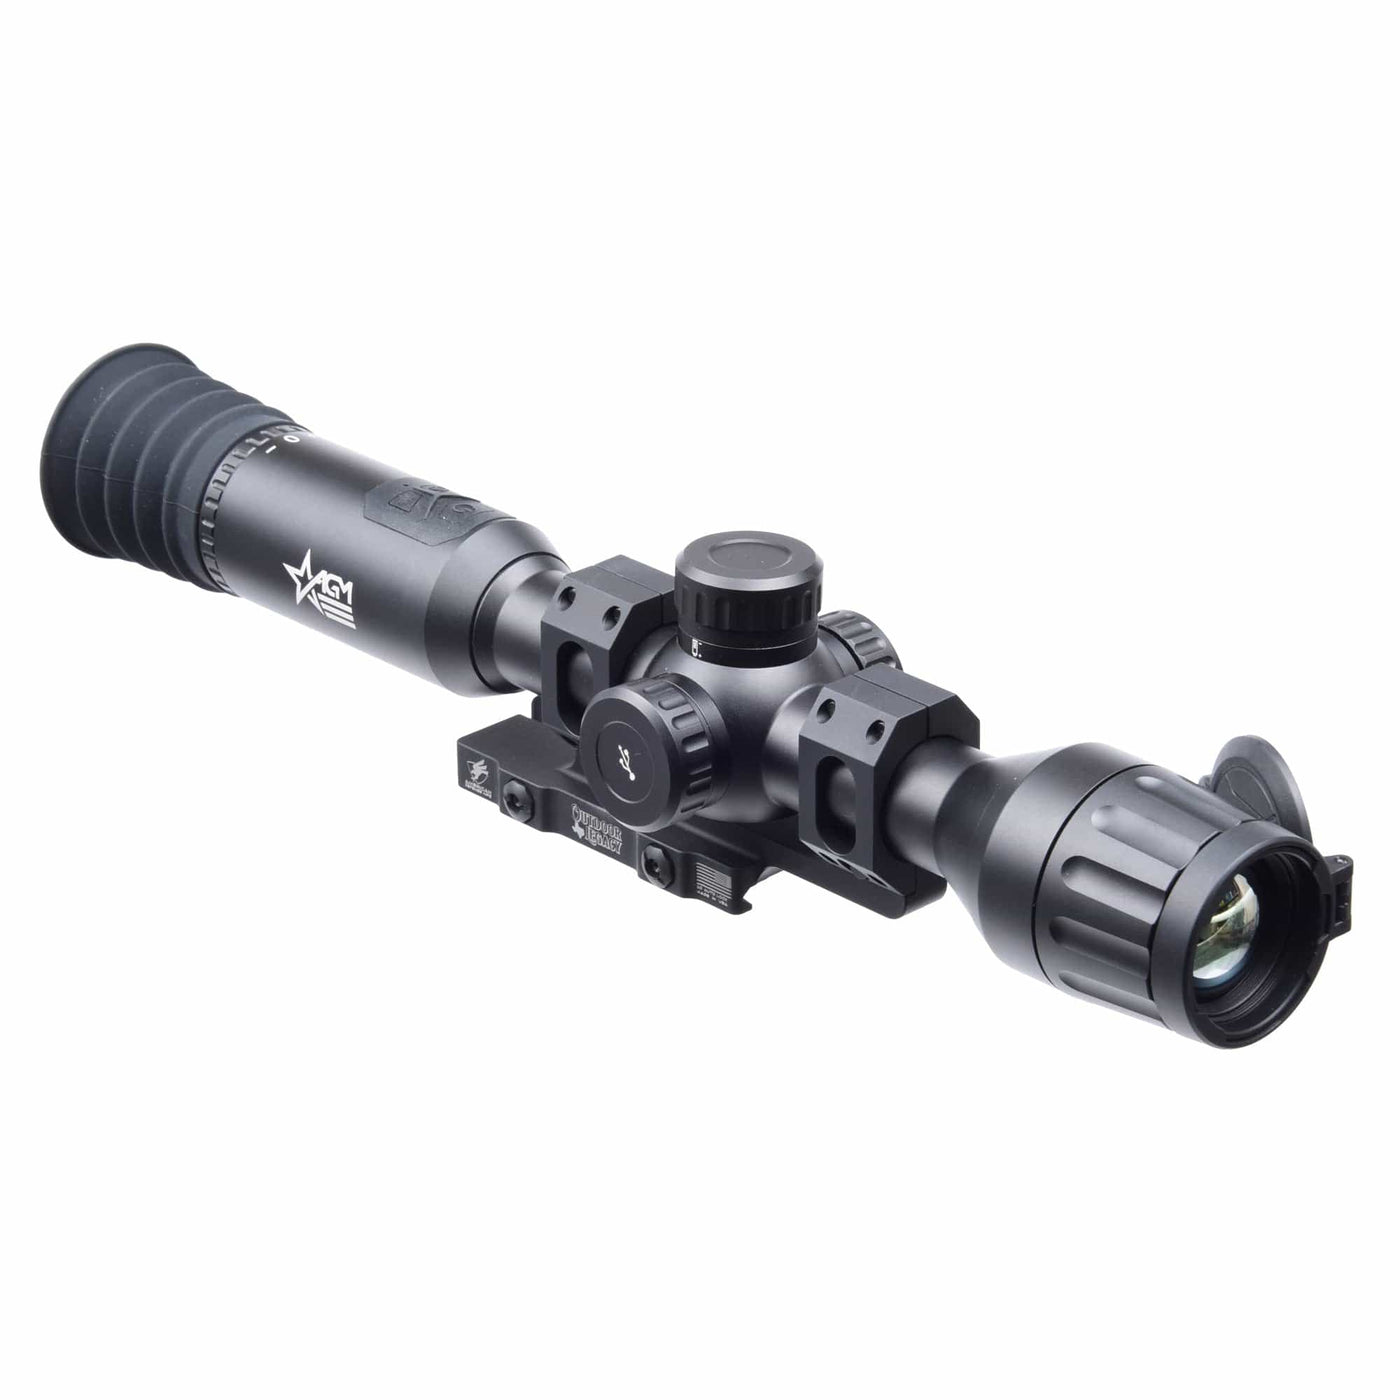 AGM AGM Adder Thermal Imaging Rifle Scope 12um Nightvision And Thermal